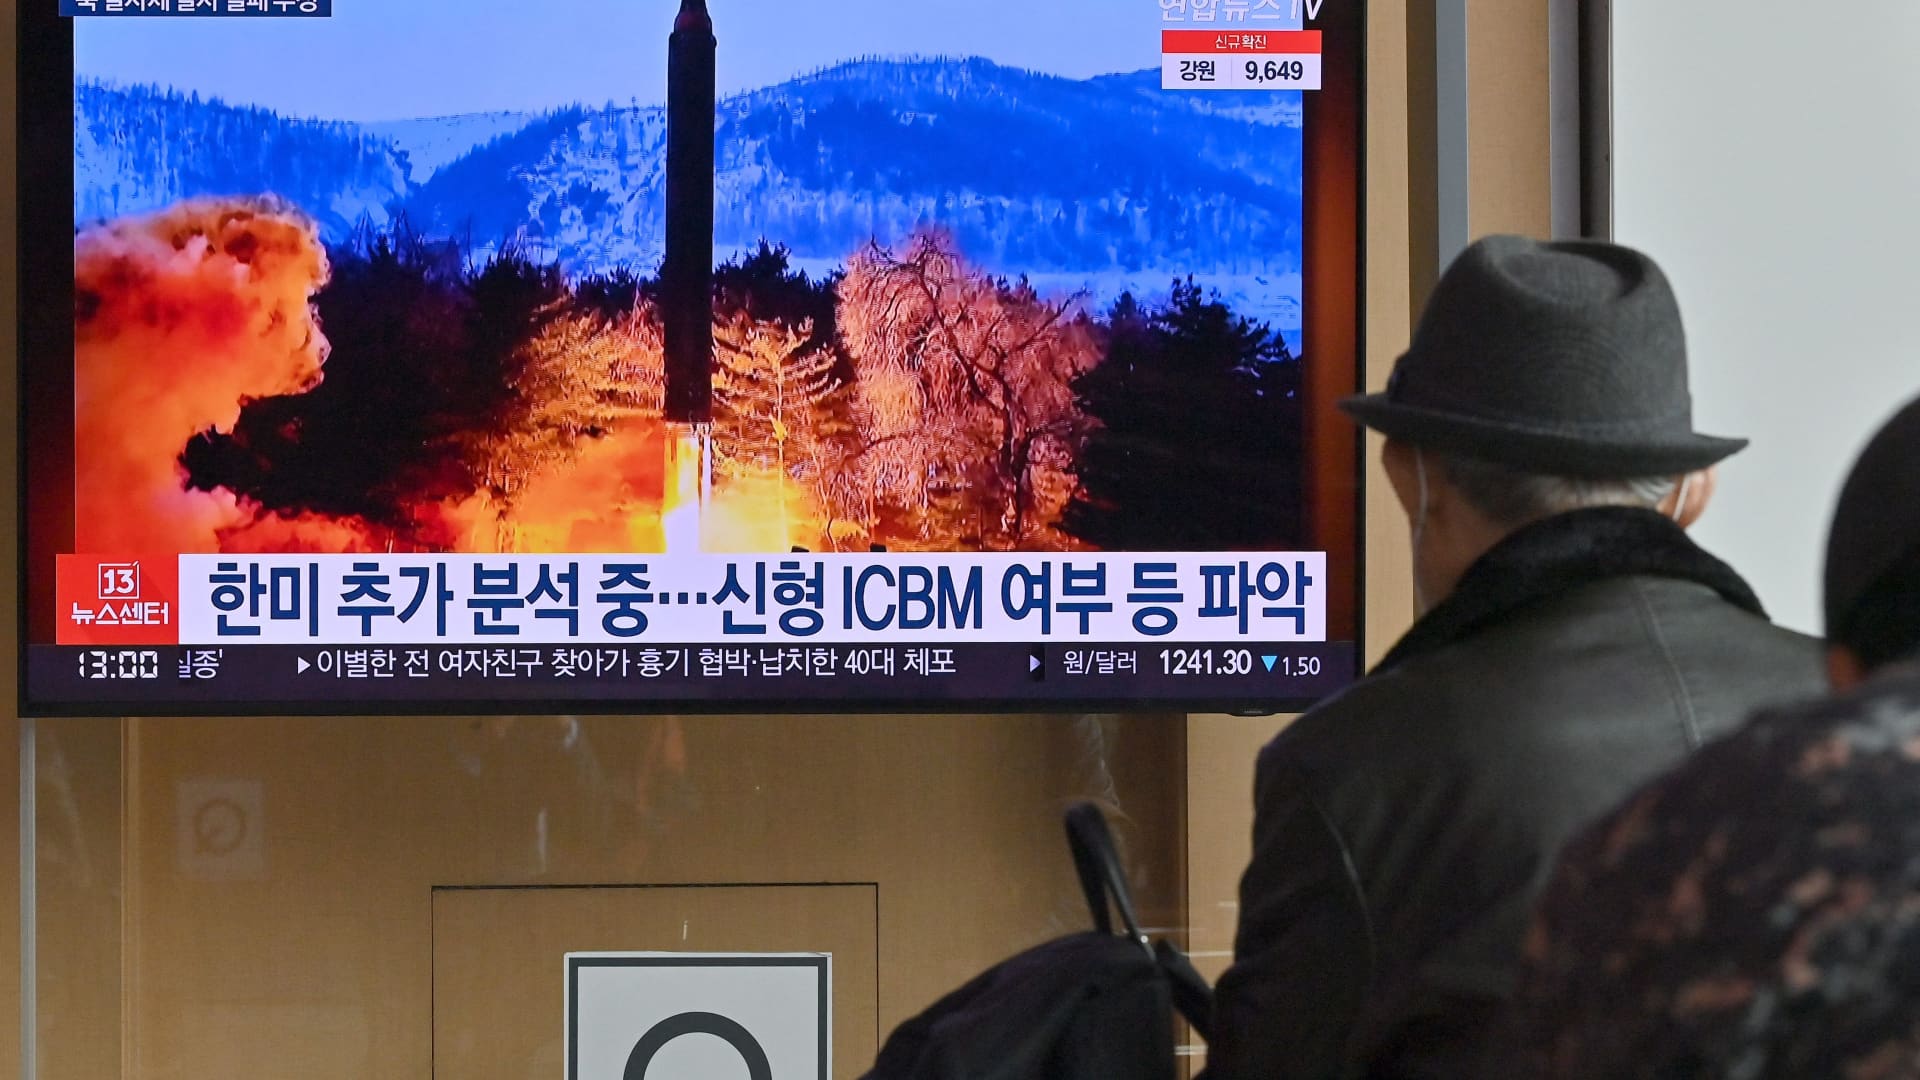 North Korea has likely tested a new type of intercontinental ballistic missile, ..